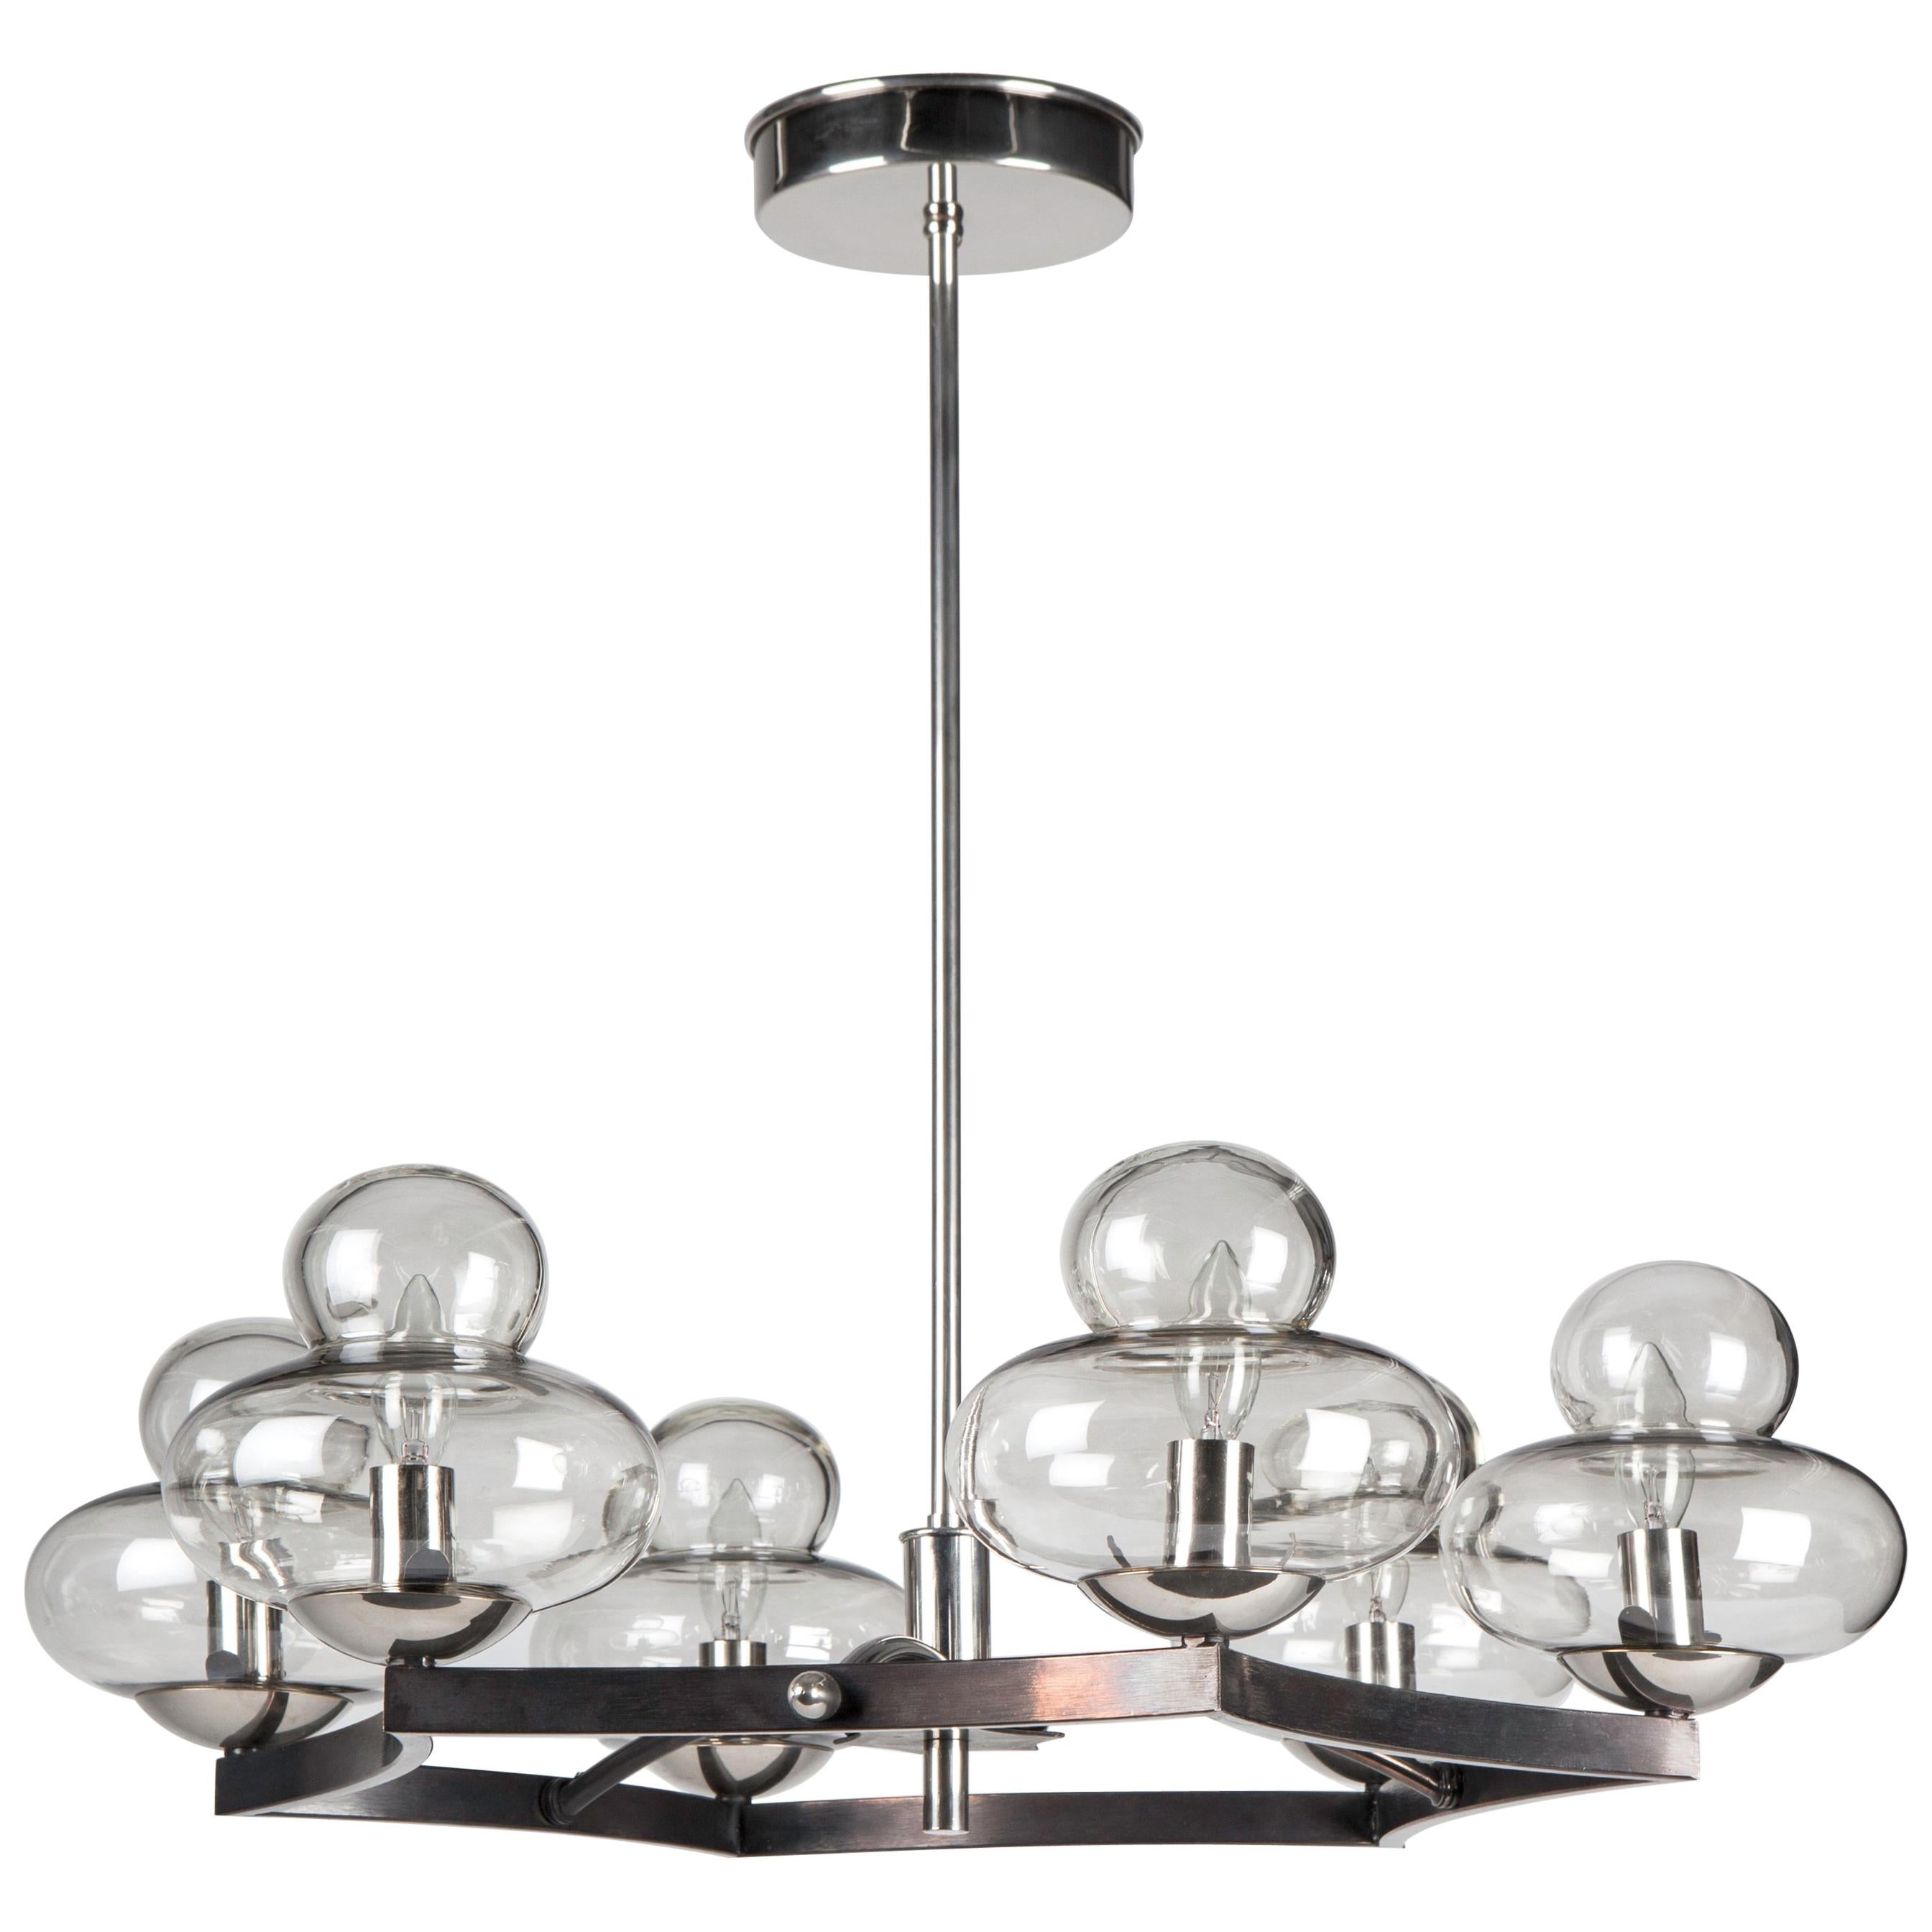 Mid-Century Modern Blown Glass and Blackened Steel Star Chandelier, circa 1950s For Sale